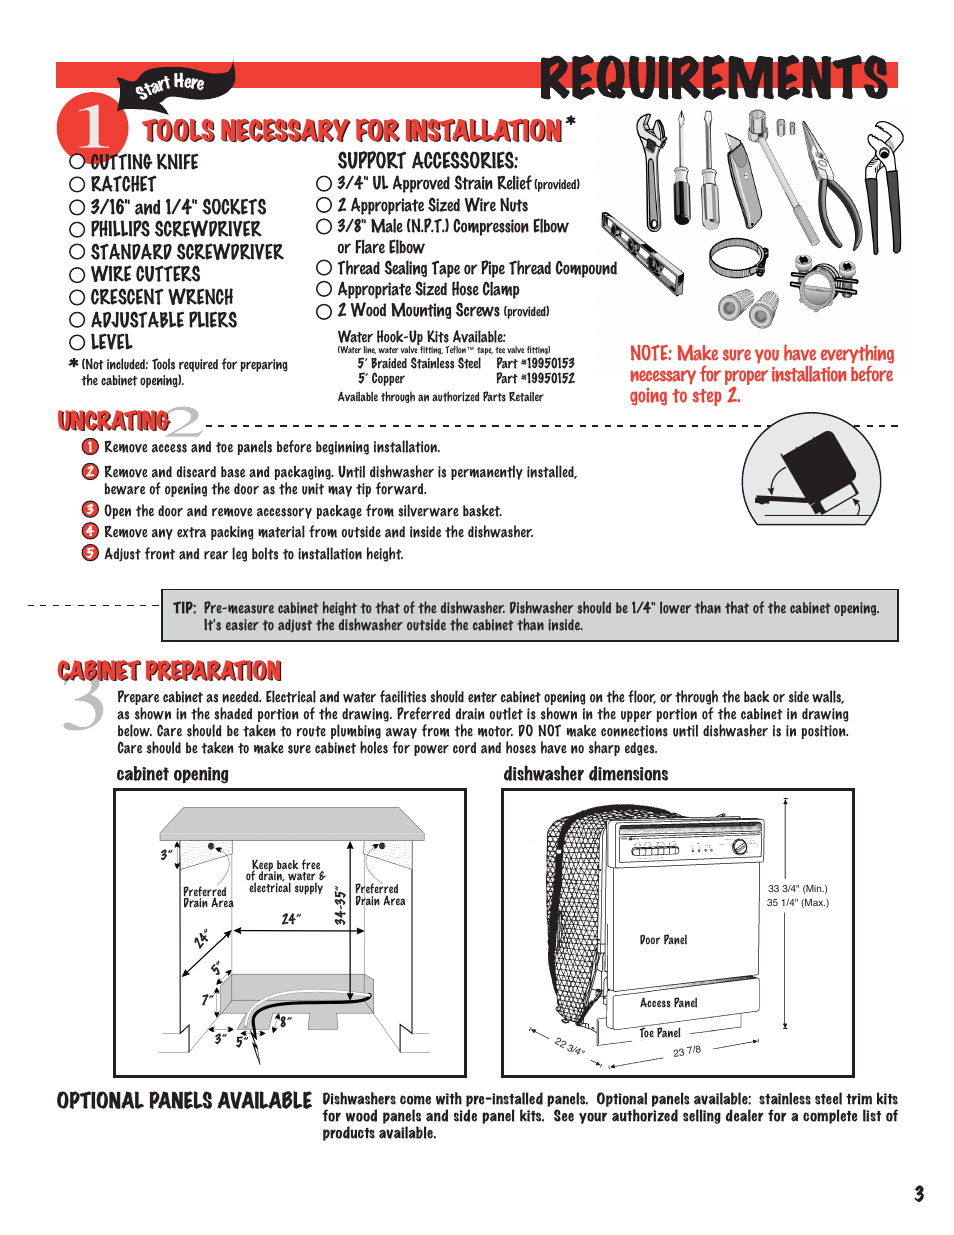 Tools necessary for installation, Uncrating, Cabinet preparation | Optional panels available, Support accessories | Maytag MDB6100AWB Installation User Manual | Page 3 / 16